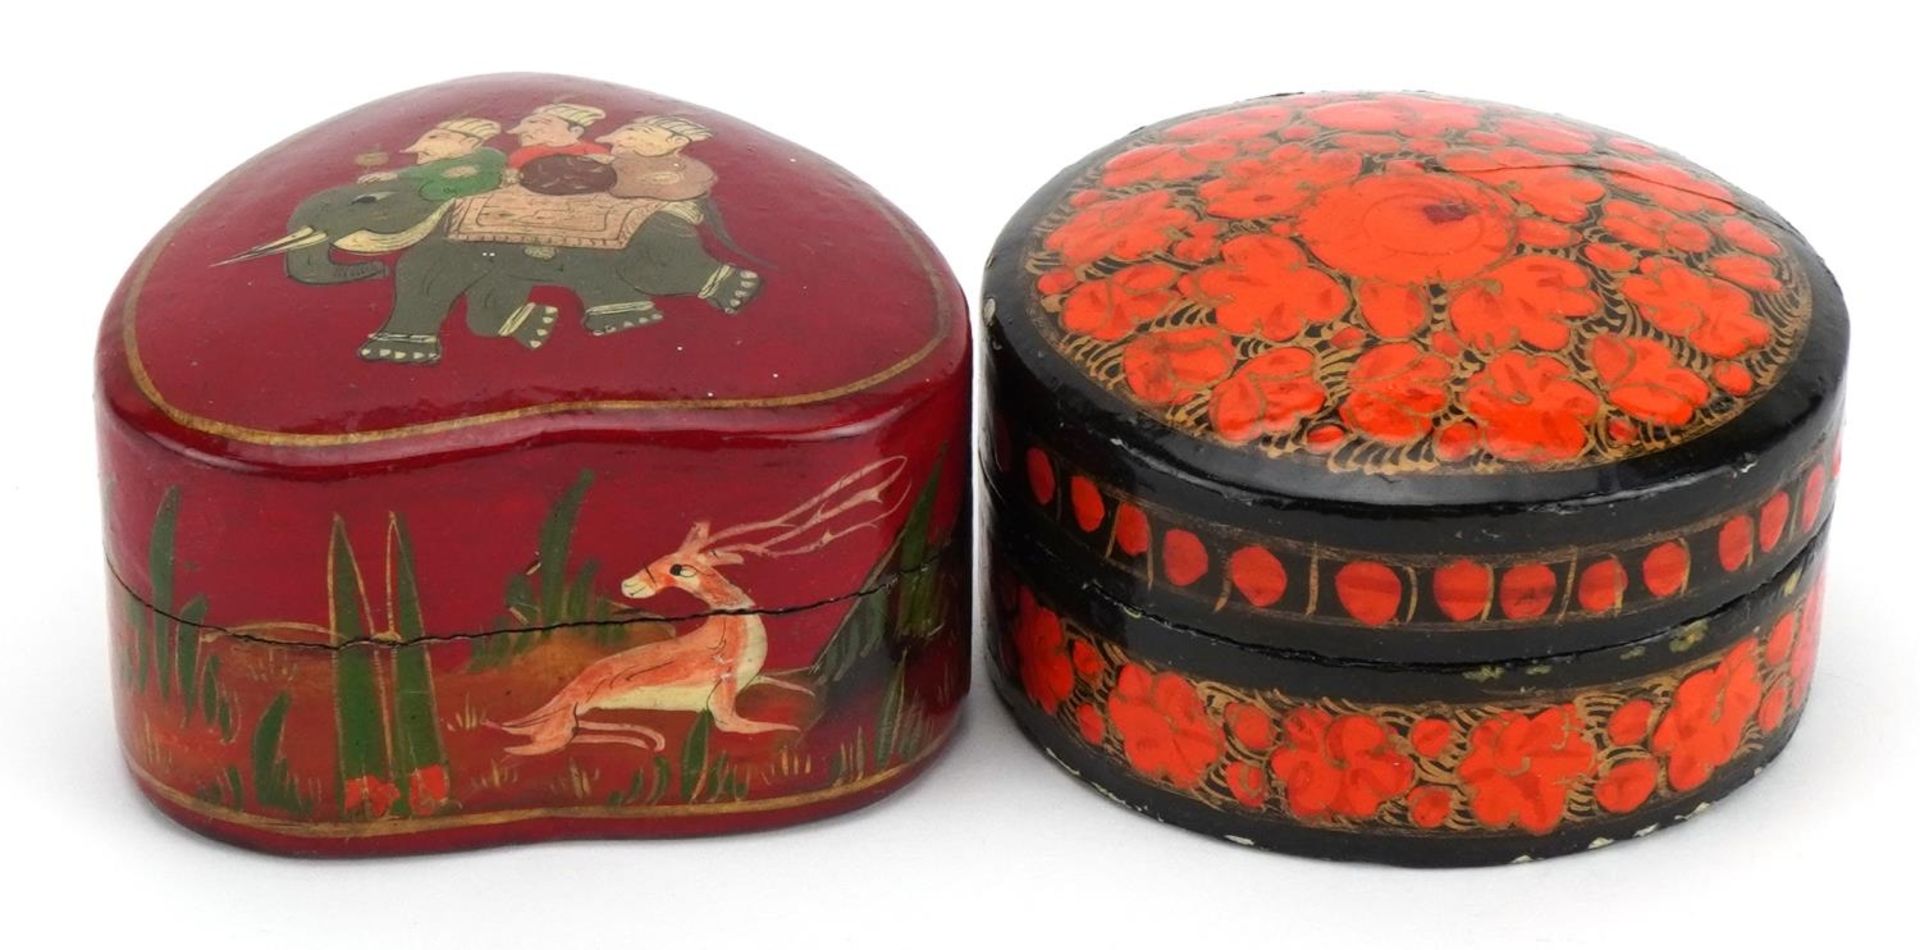 Two Indian lacquered boxes and covers including one hand painted with an elephant and consort, the